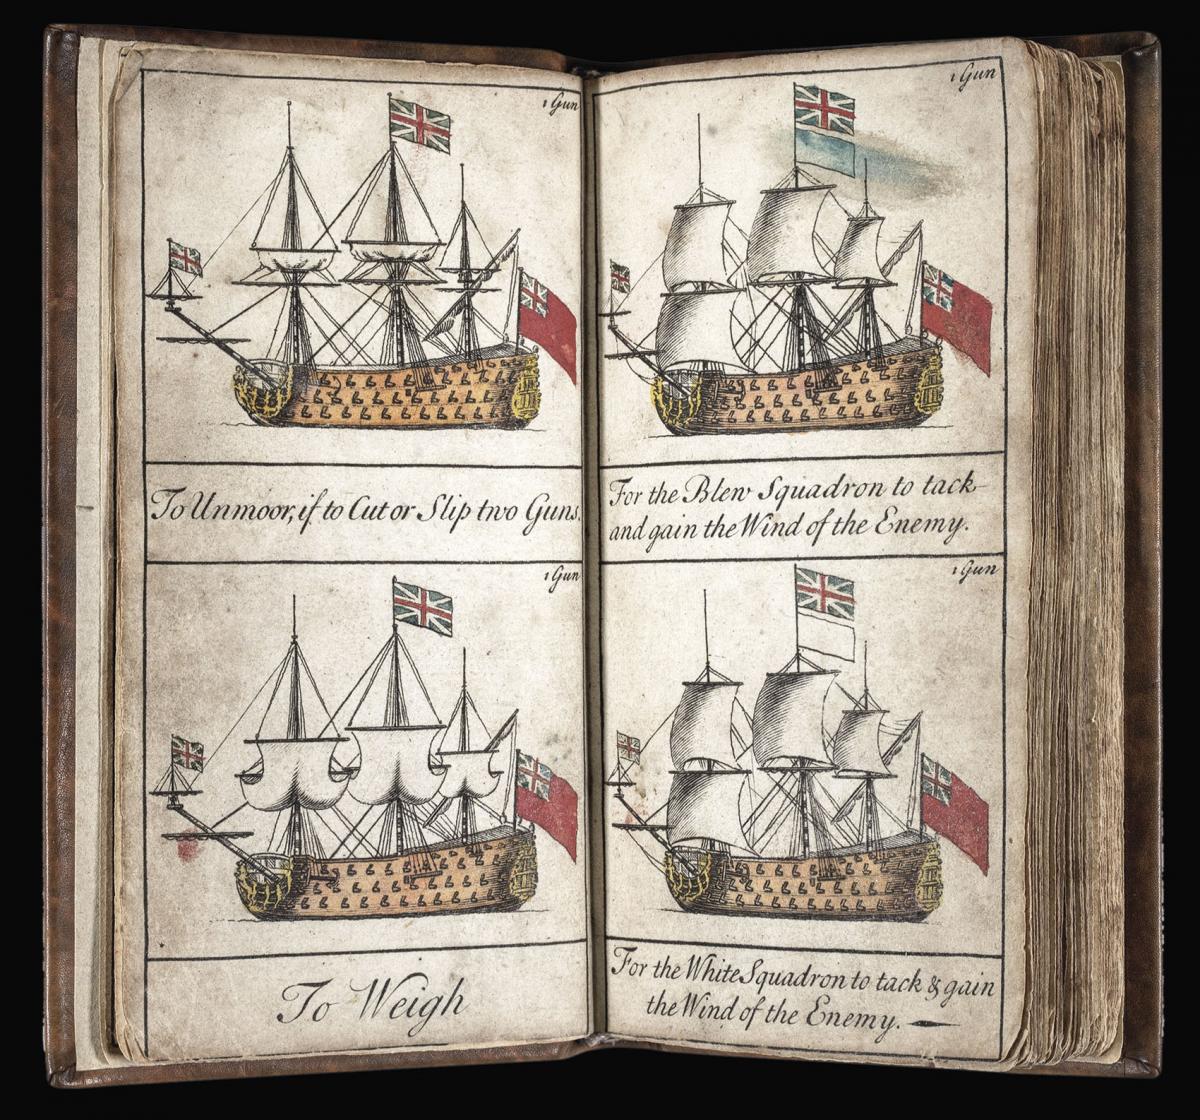 The first printed English signals book